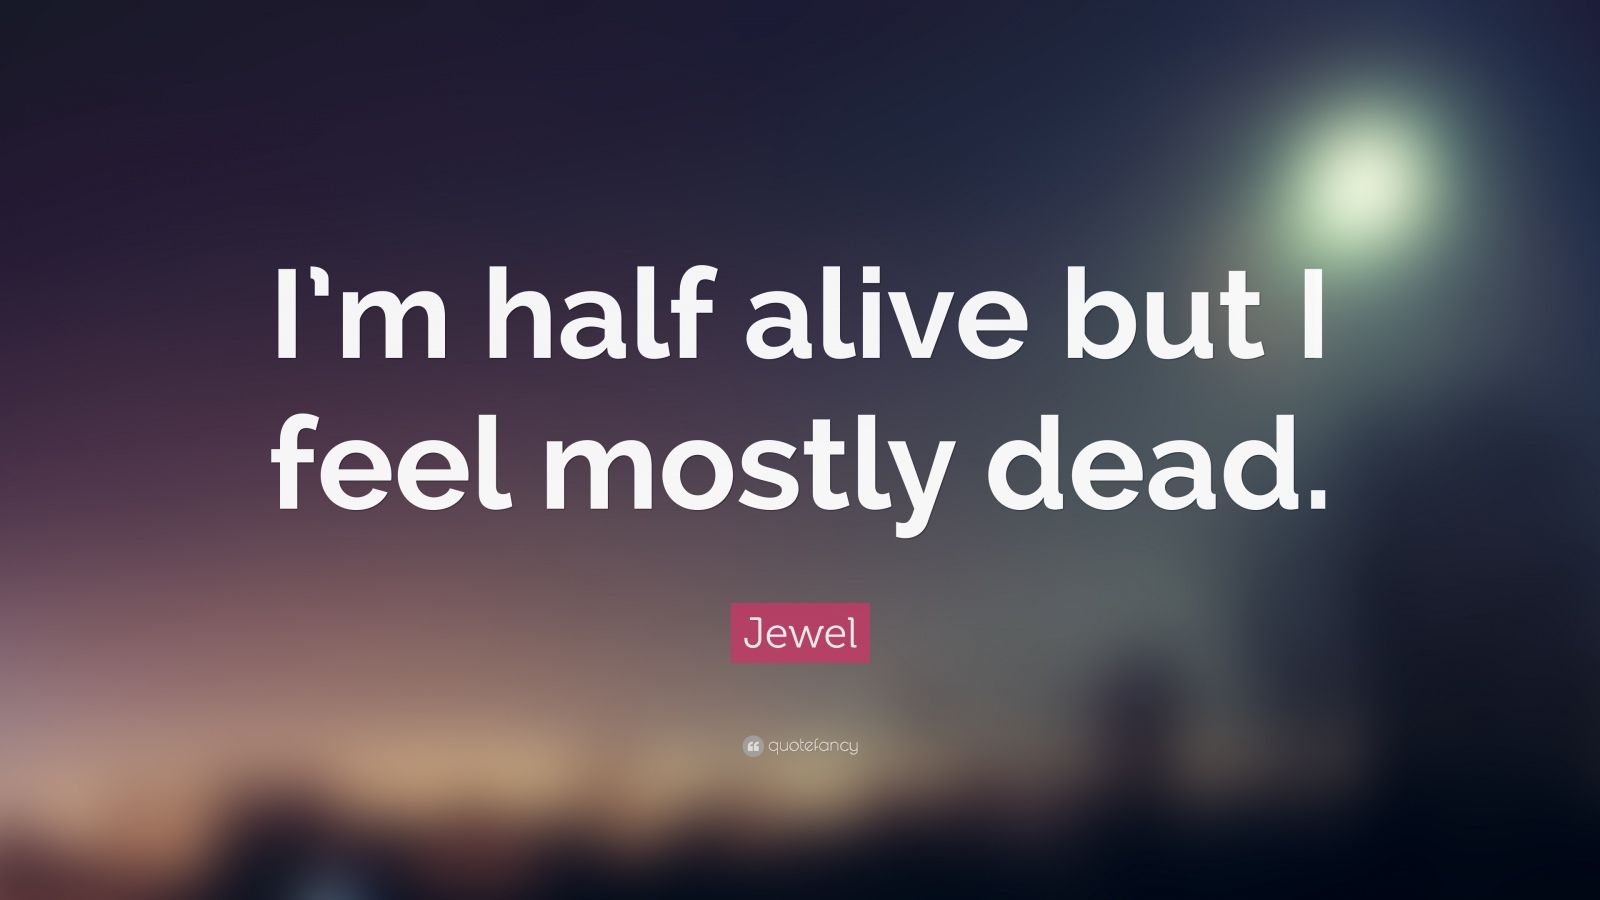 Jewel Quote: “I'm half alive but I feel mostly dead.”